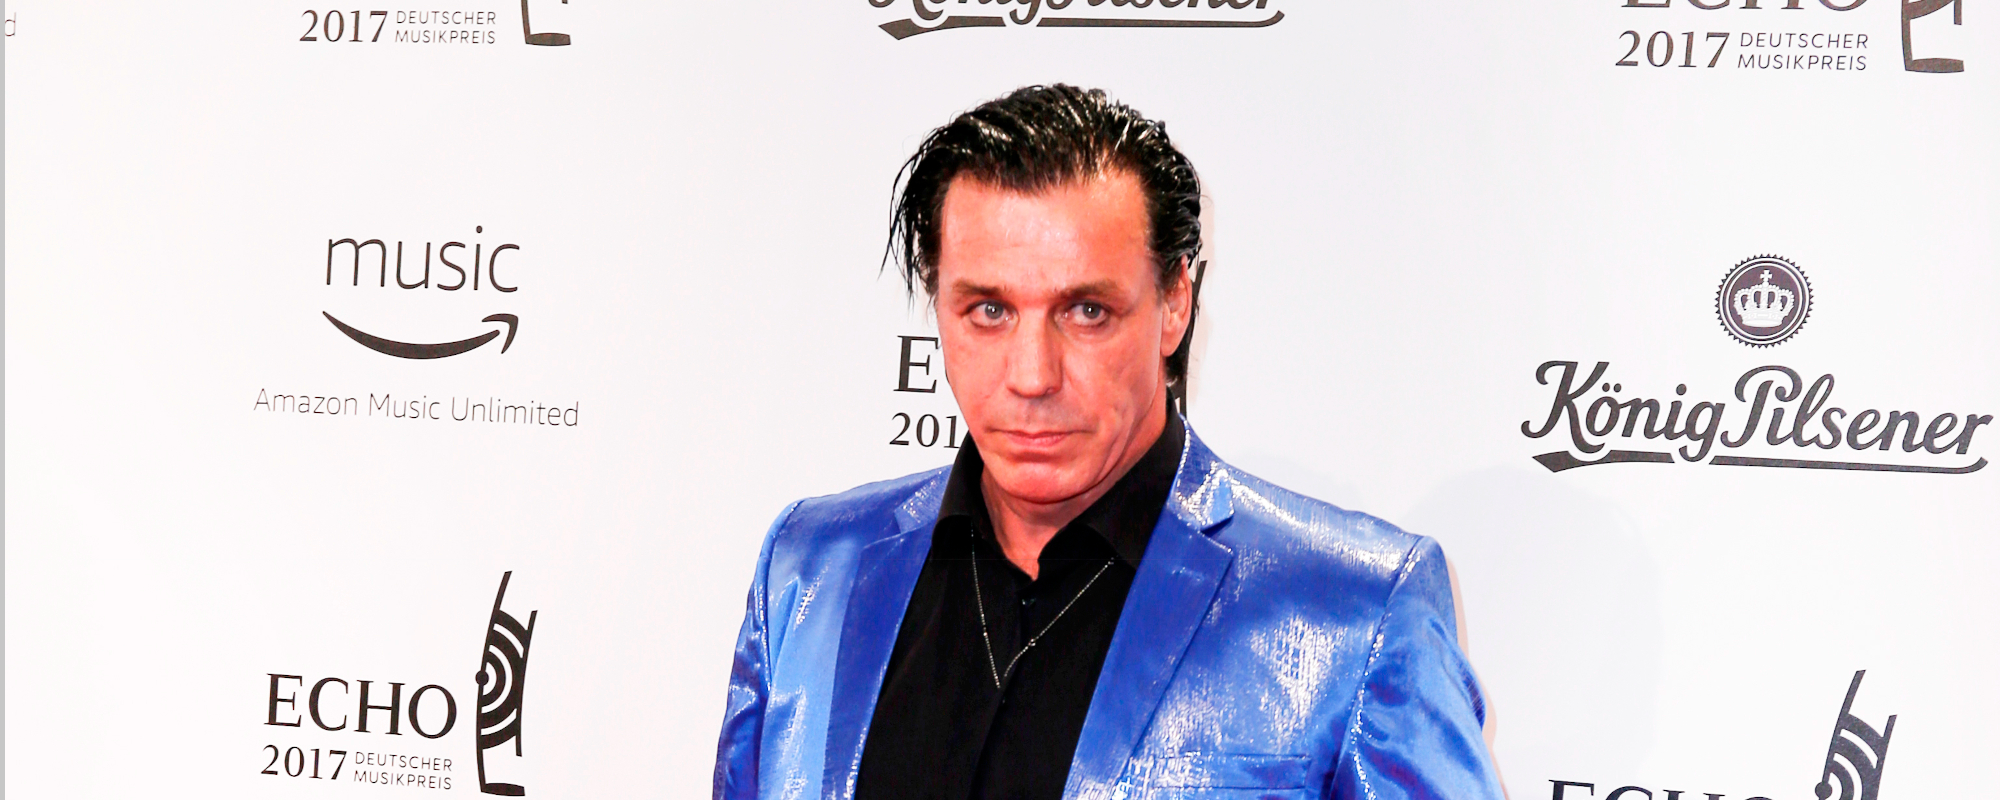 Rammstein Singer Till Lindemann Accused of Recruiting Fans for Sex, Band Responds